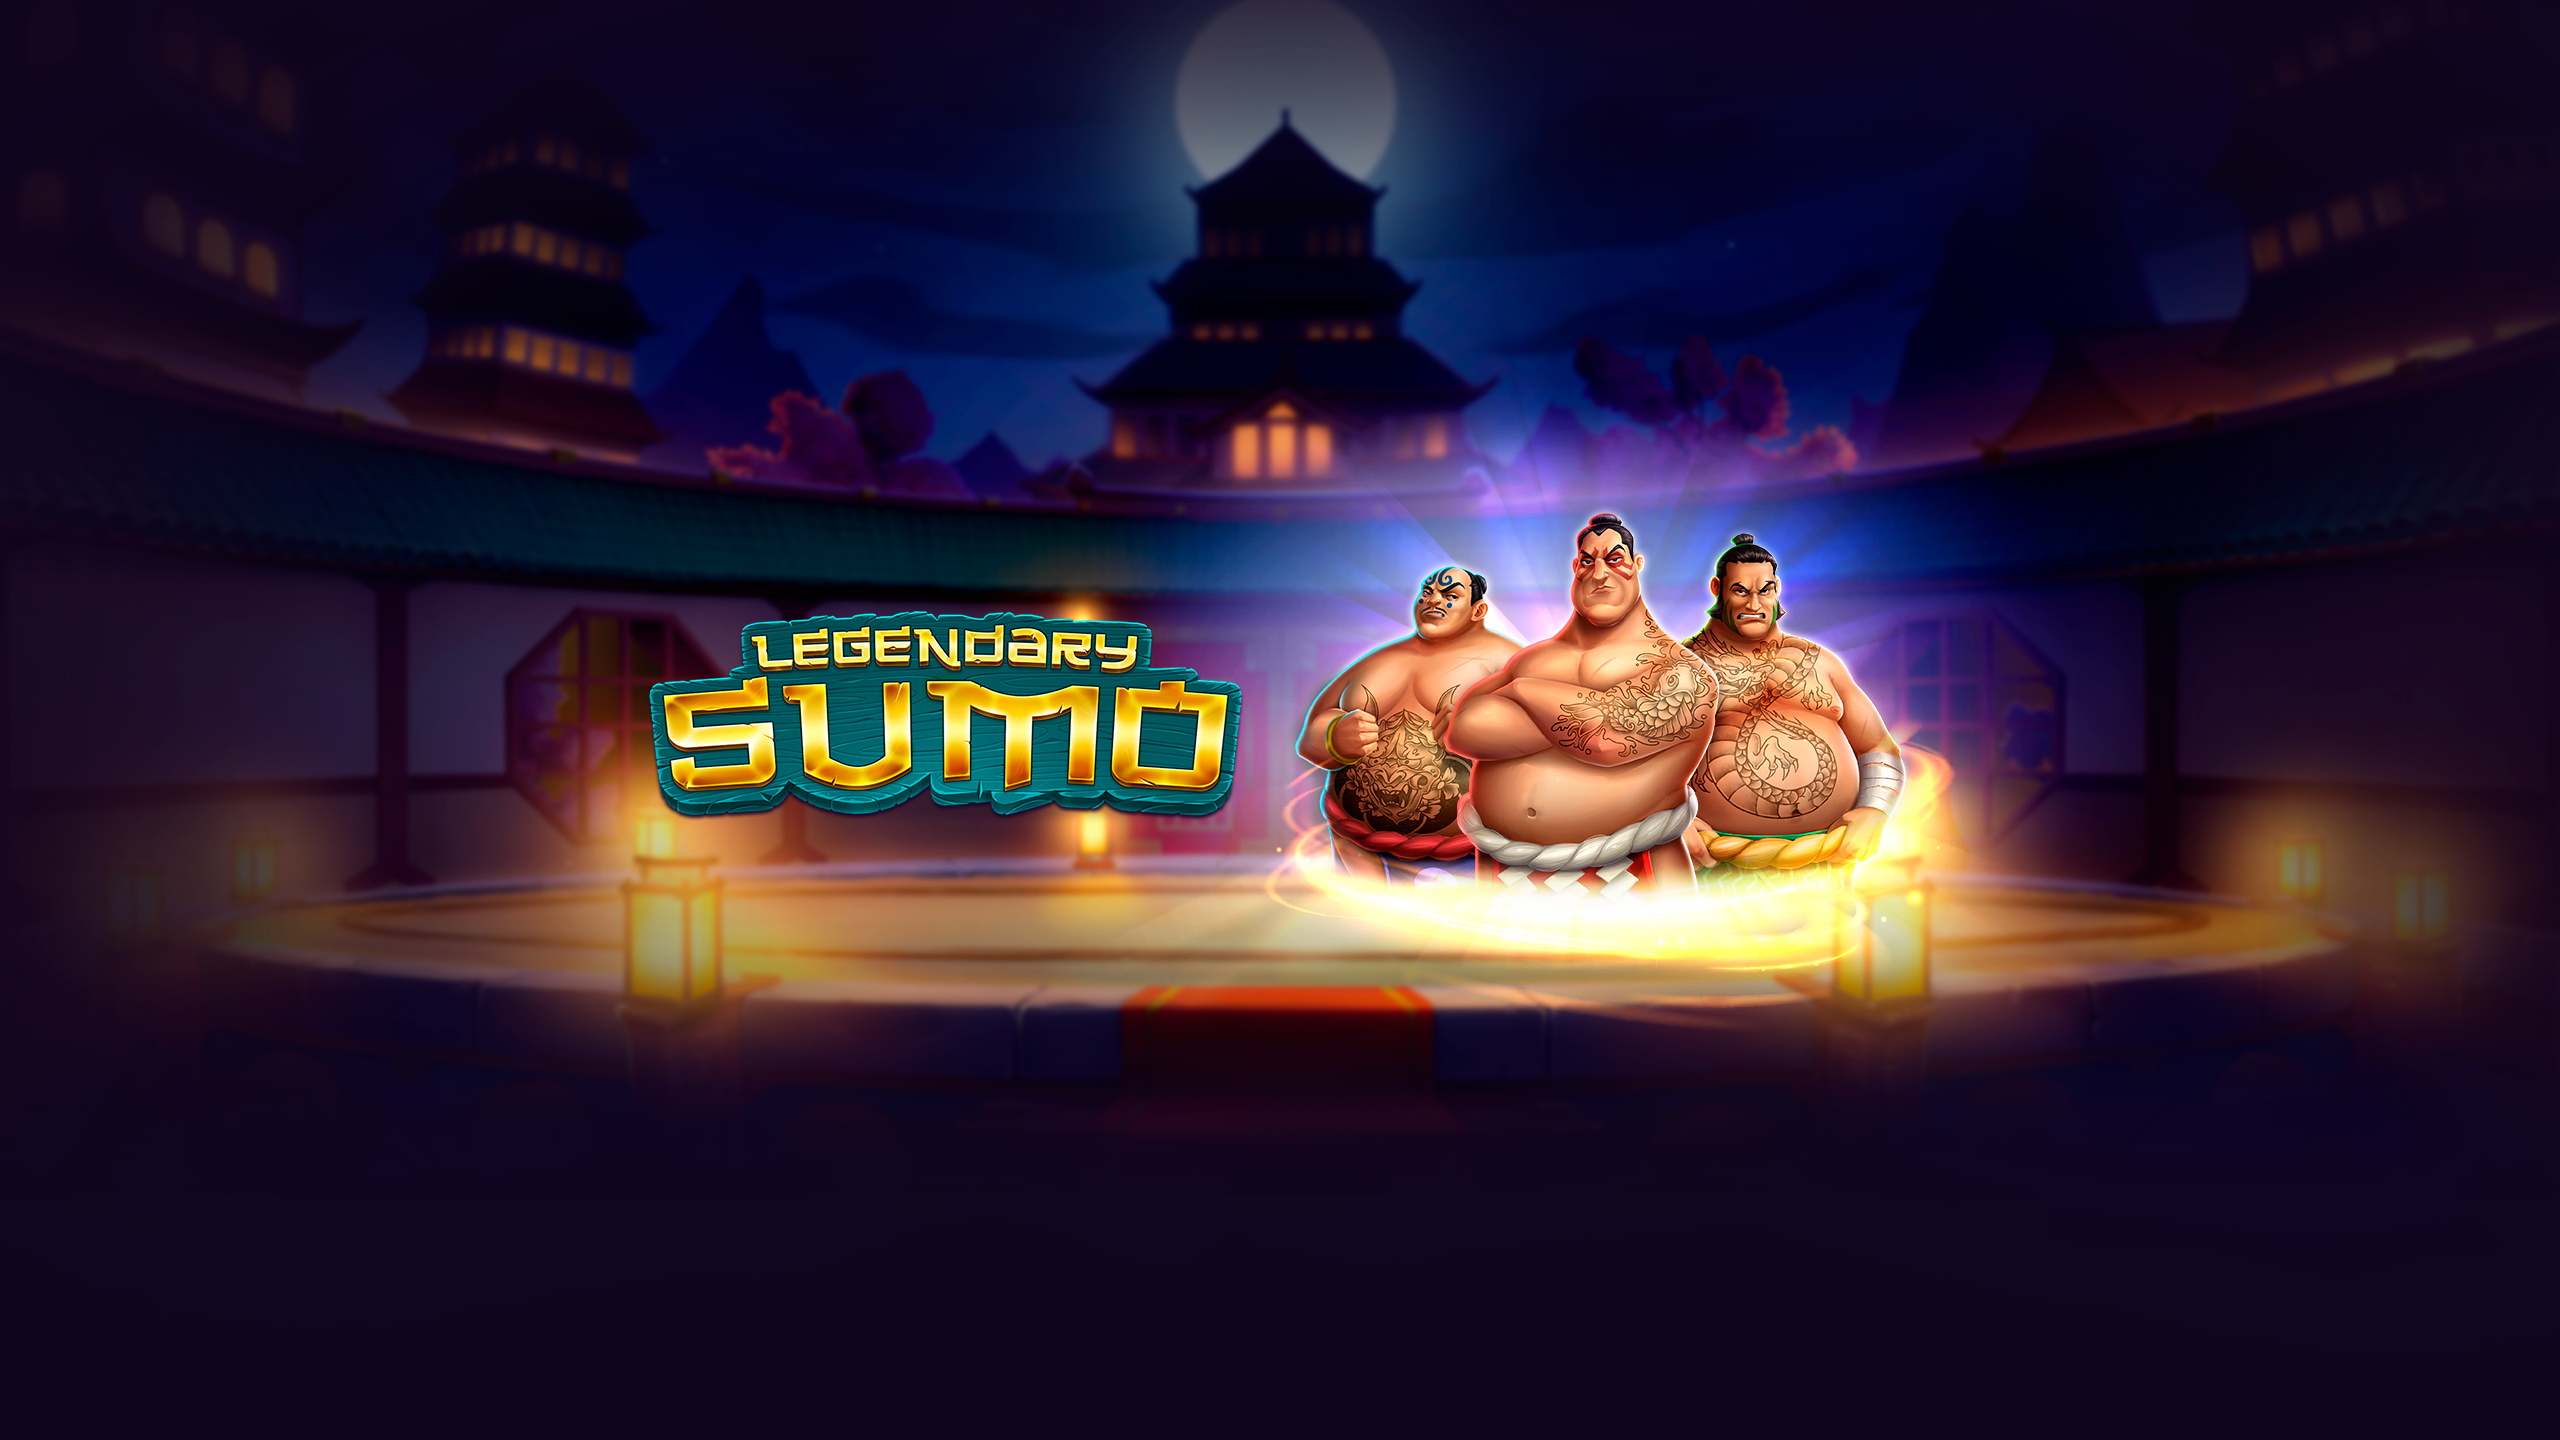 The Legendary Sumo Online Slot Demo Game by Endorphina